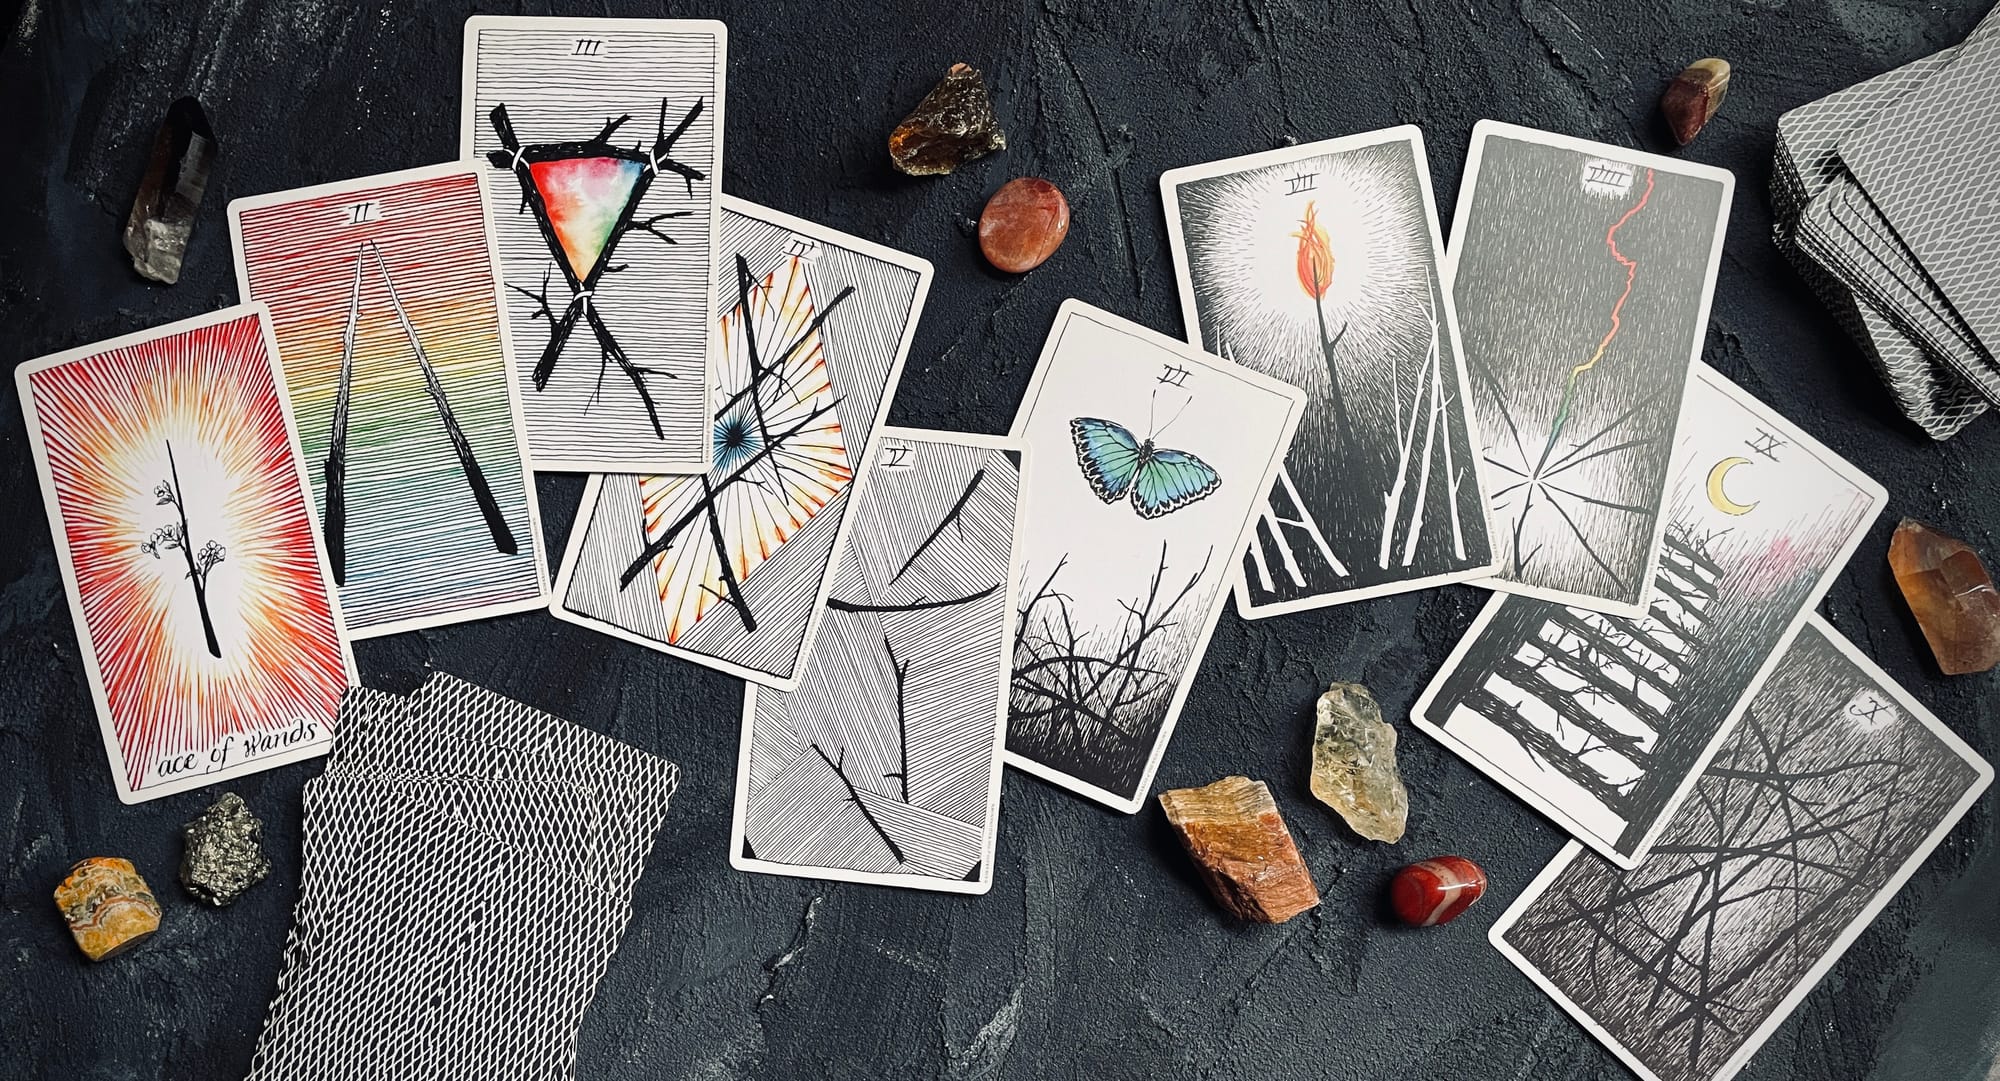 ace through ten of the suit of wands from the wild unknown tarot